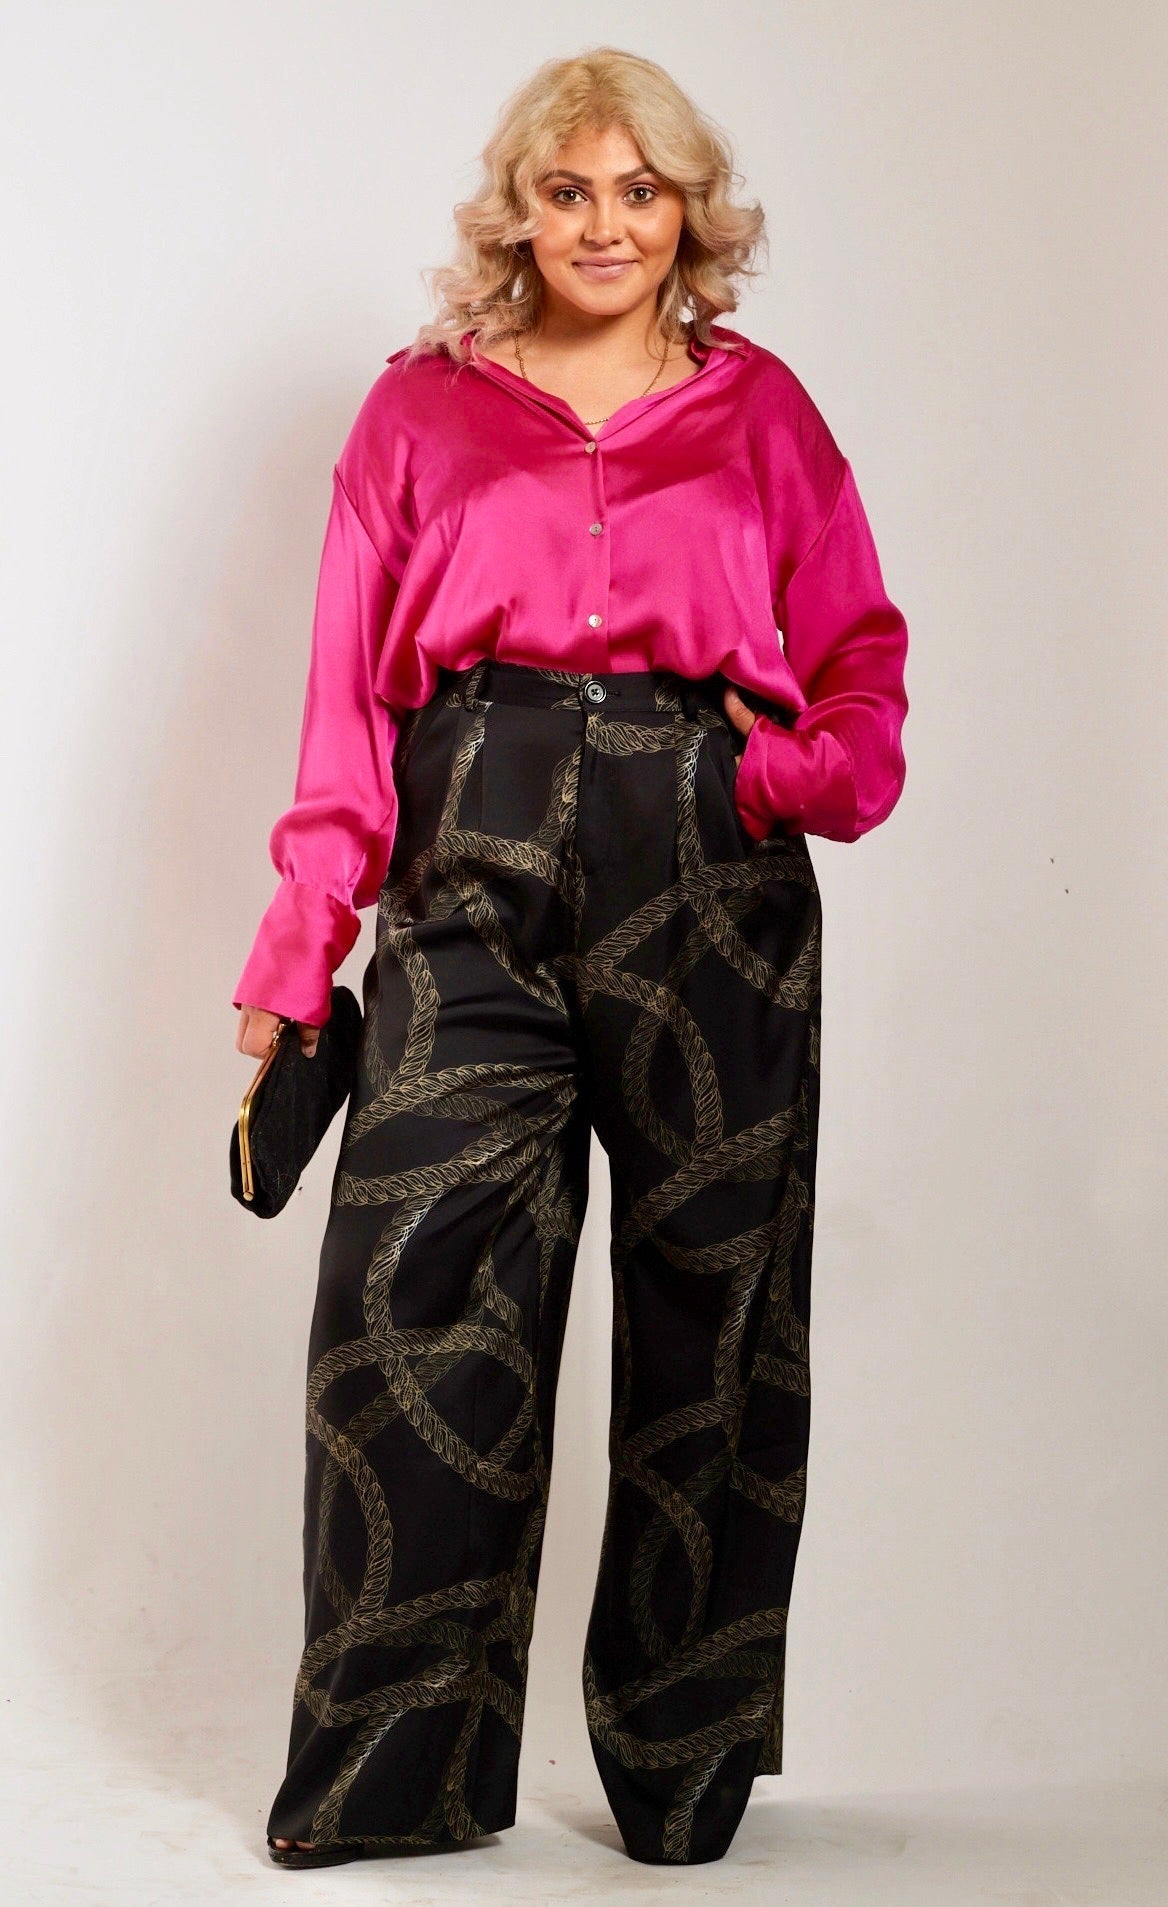 front profile of woman wearing black and gold chain printed yacht slacks and pink blouse